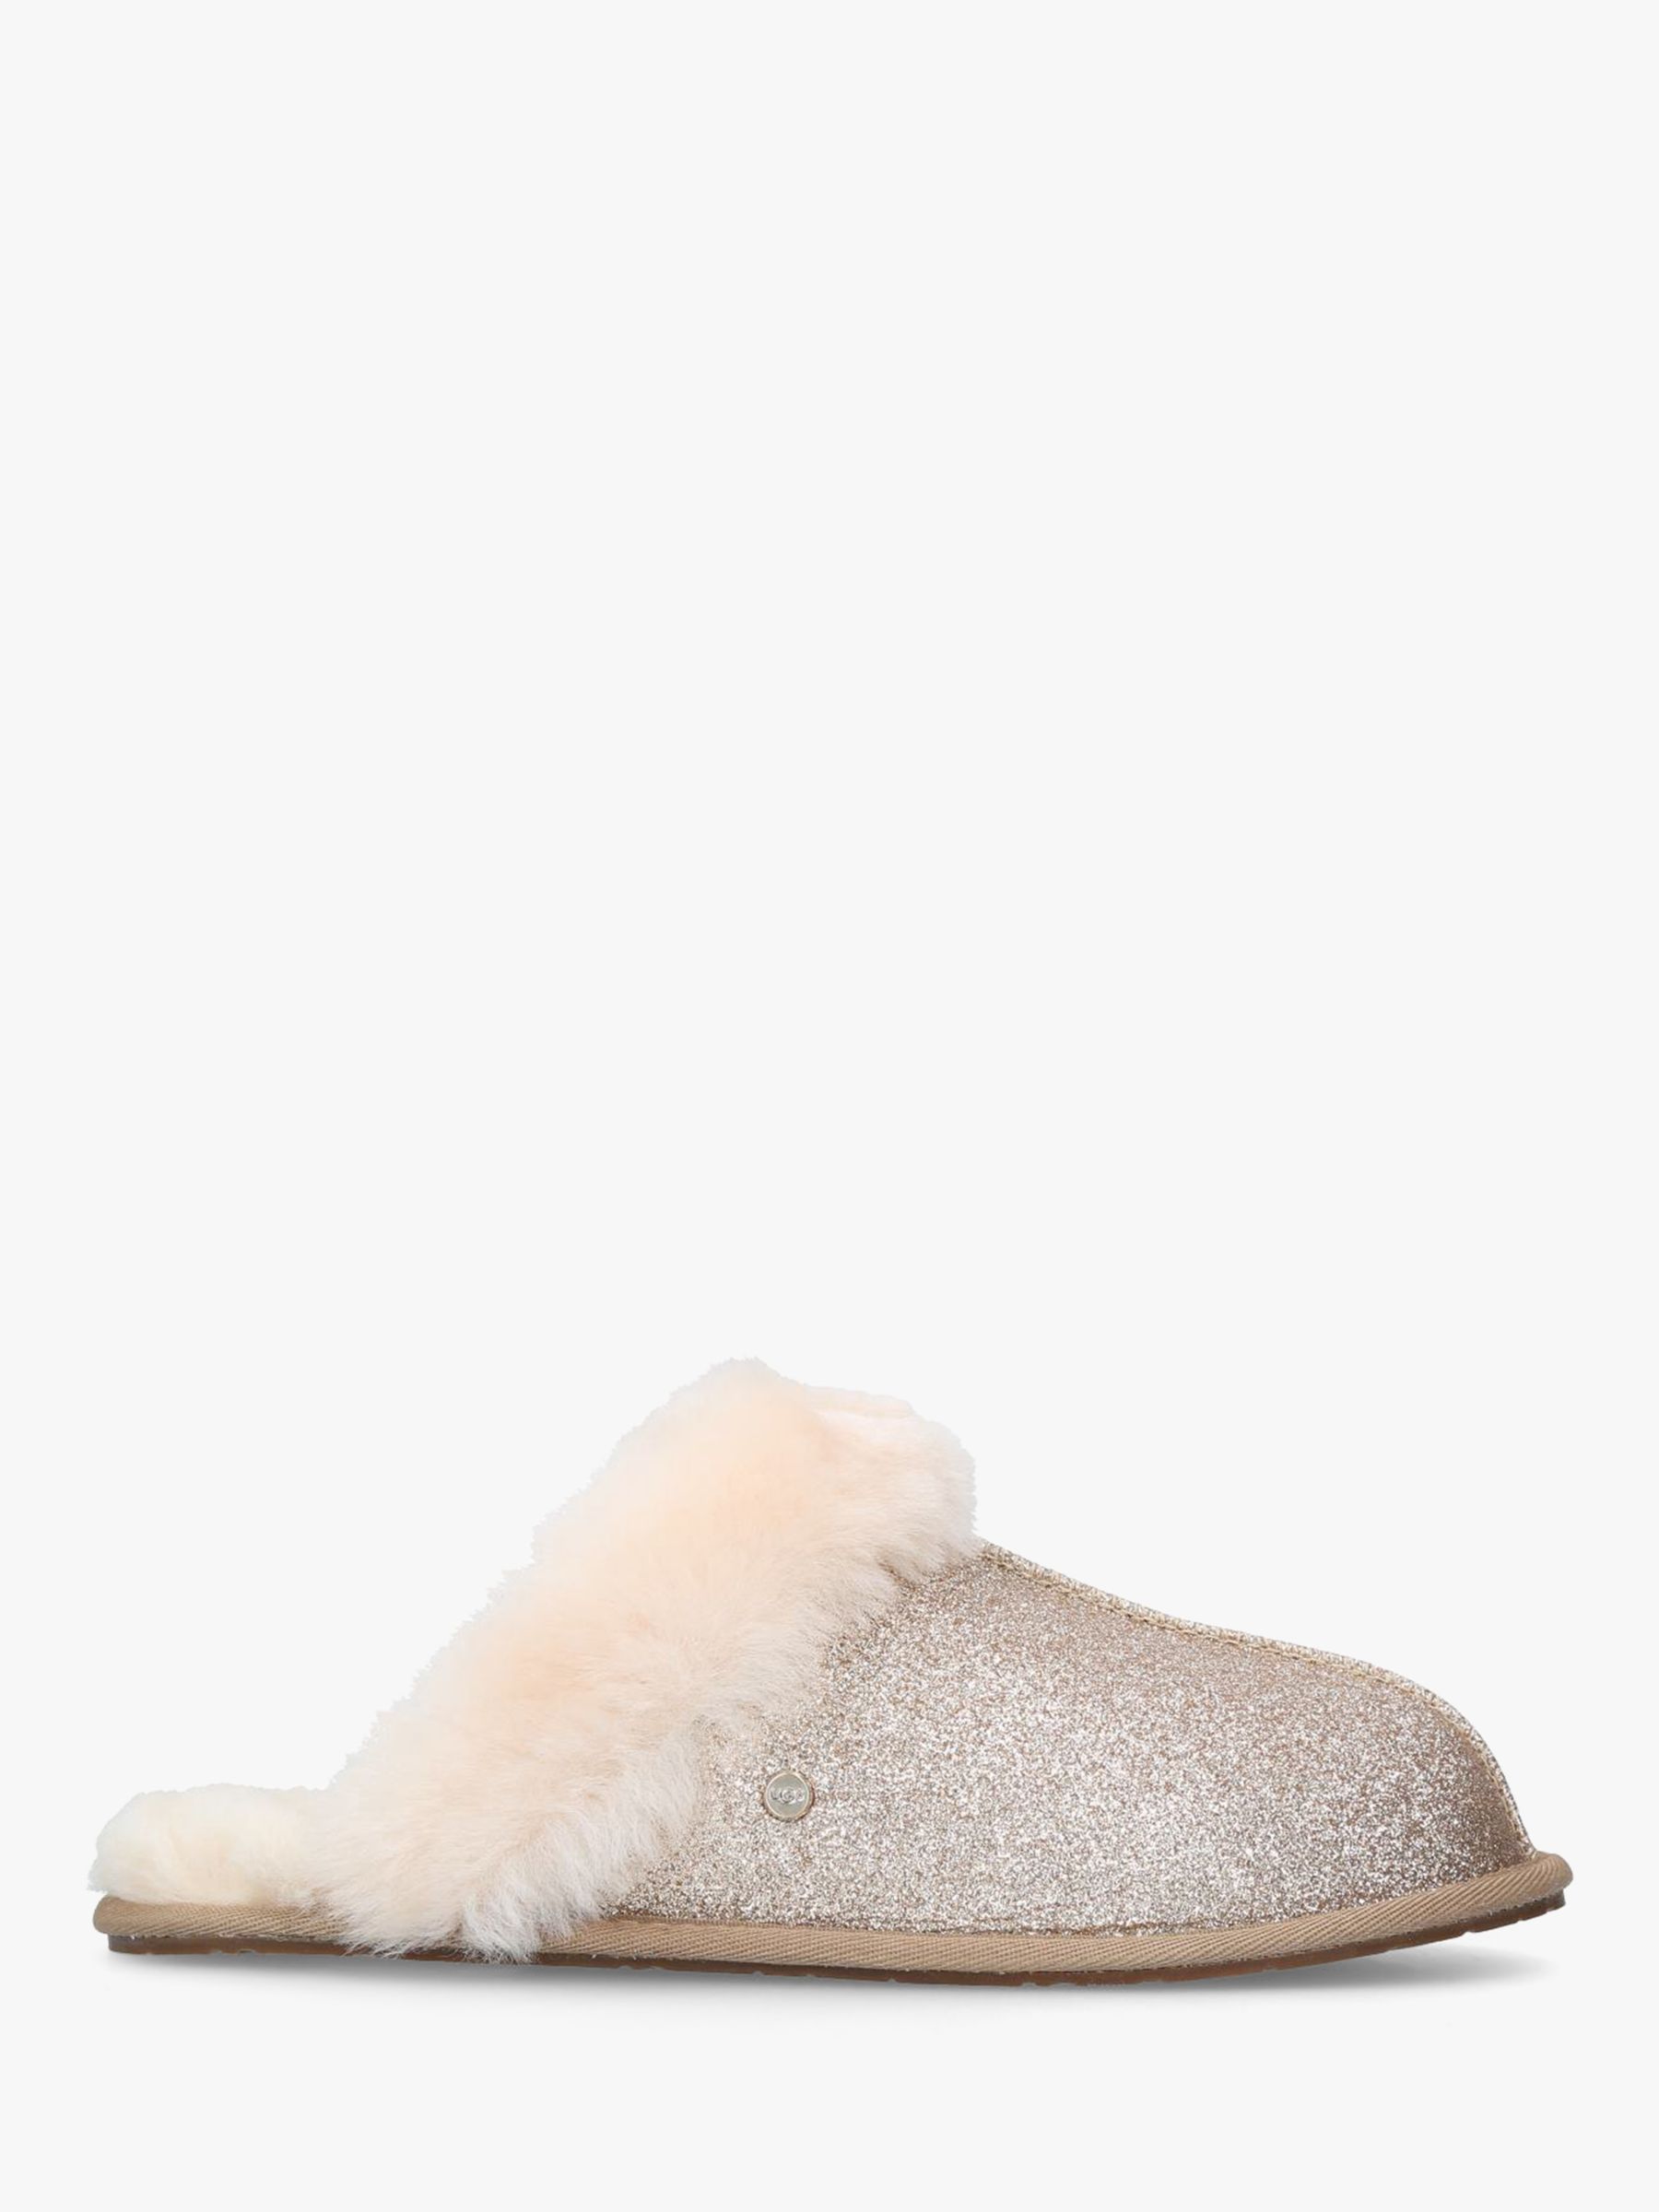 UGG Sparkle Glitter Scuffette Slippers at John Lewis & Partners